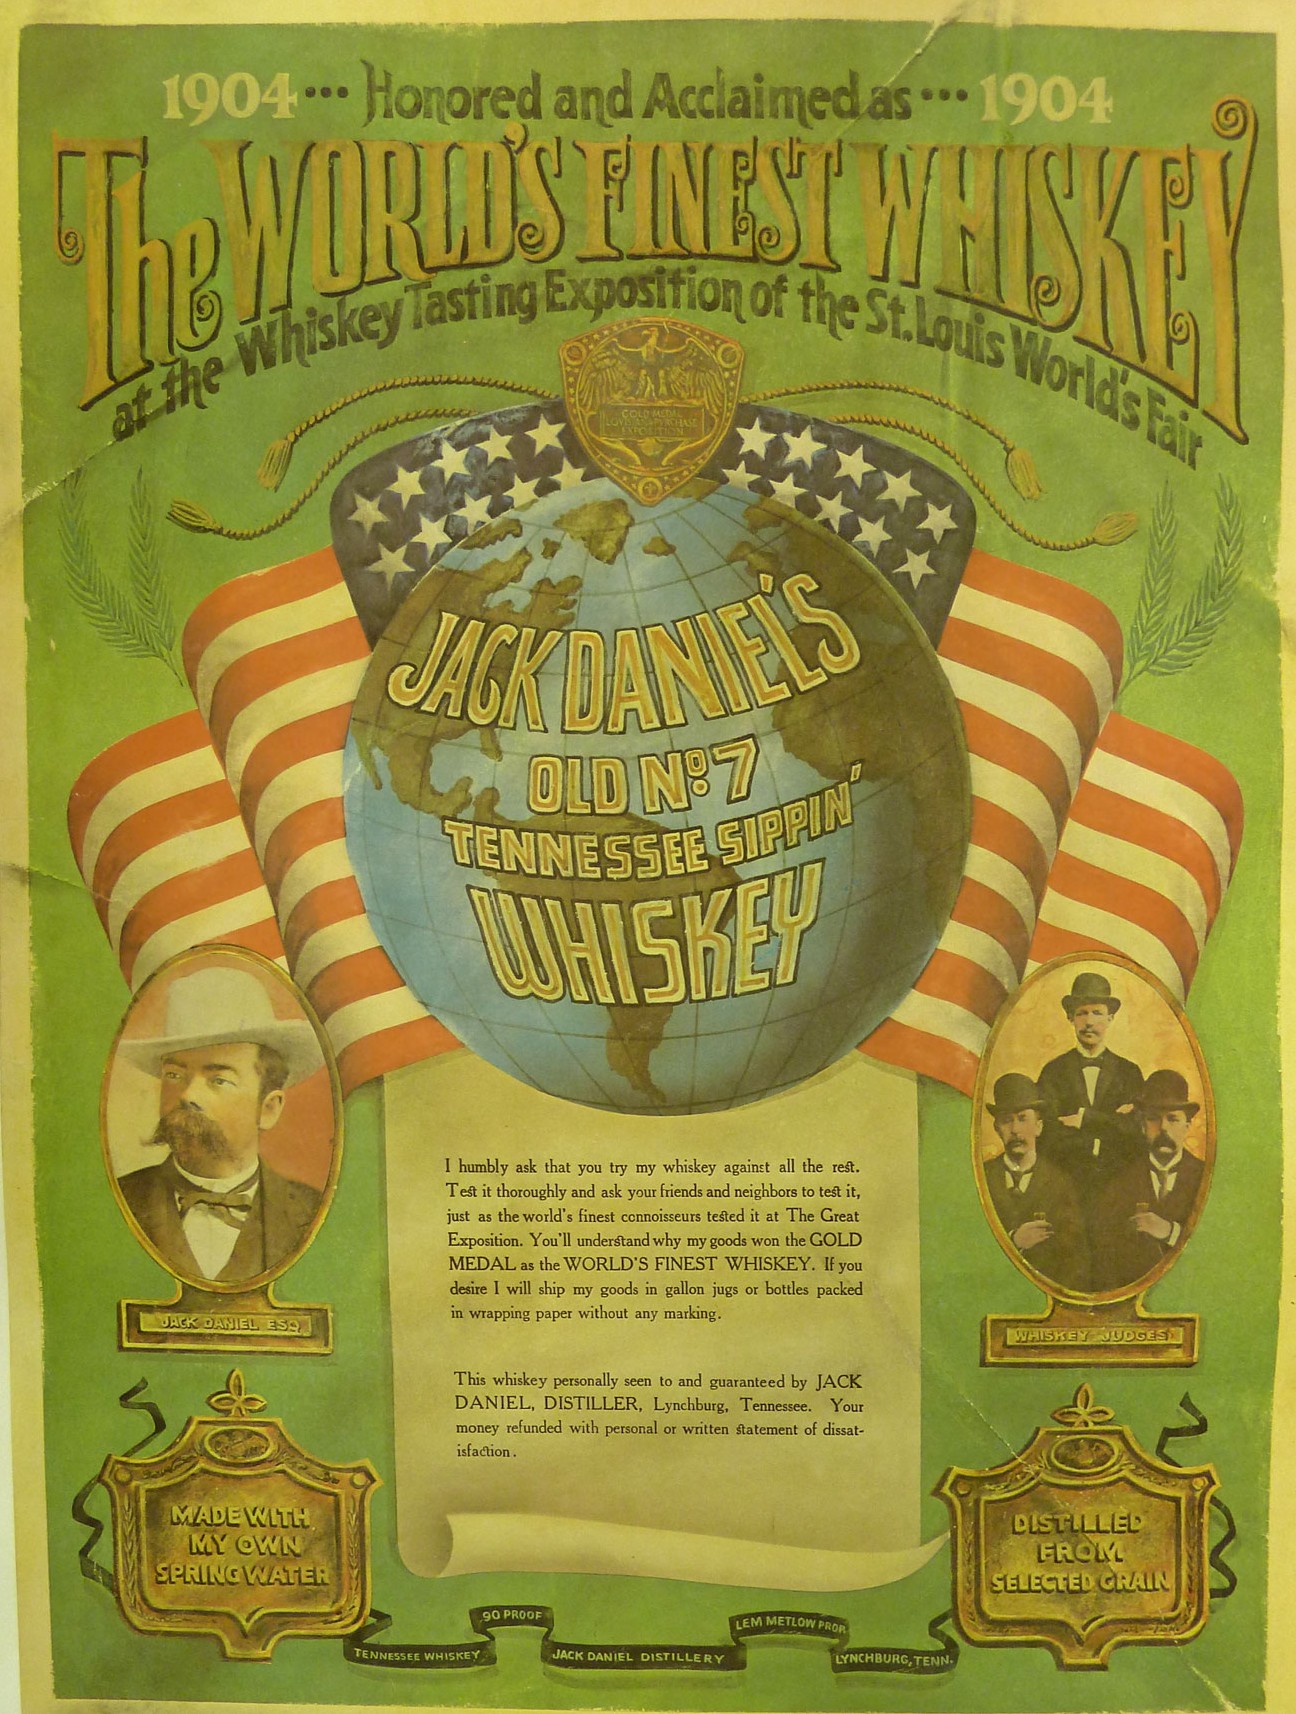 A green exposition poster with a centered blue and green globe, hovering over an American flag ribbon with a gold emblem. The globe has the words “Jack Daniel’s Old Number Seven Tennessee Sippin’ Whiskey” wrapped over it. At the top reads “The World’s Finest Whiskey at the Whisky Tasting Exposition of the St. Louis World’s Fair”.